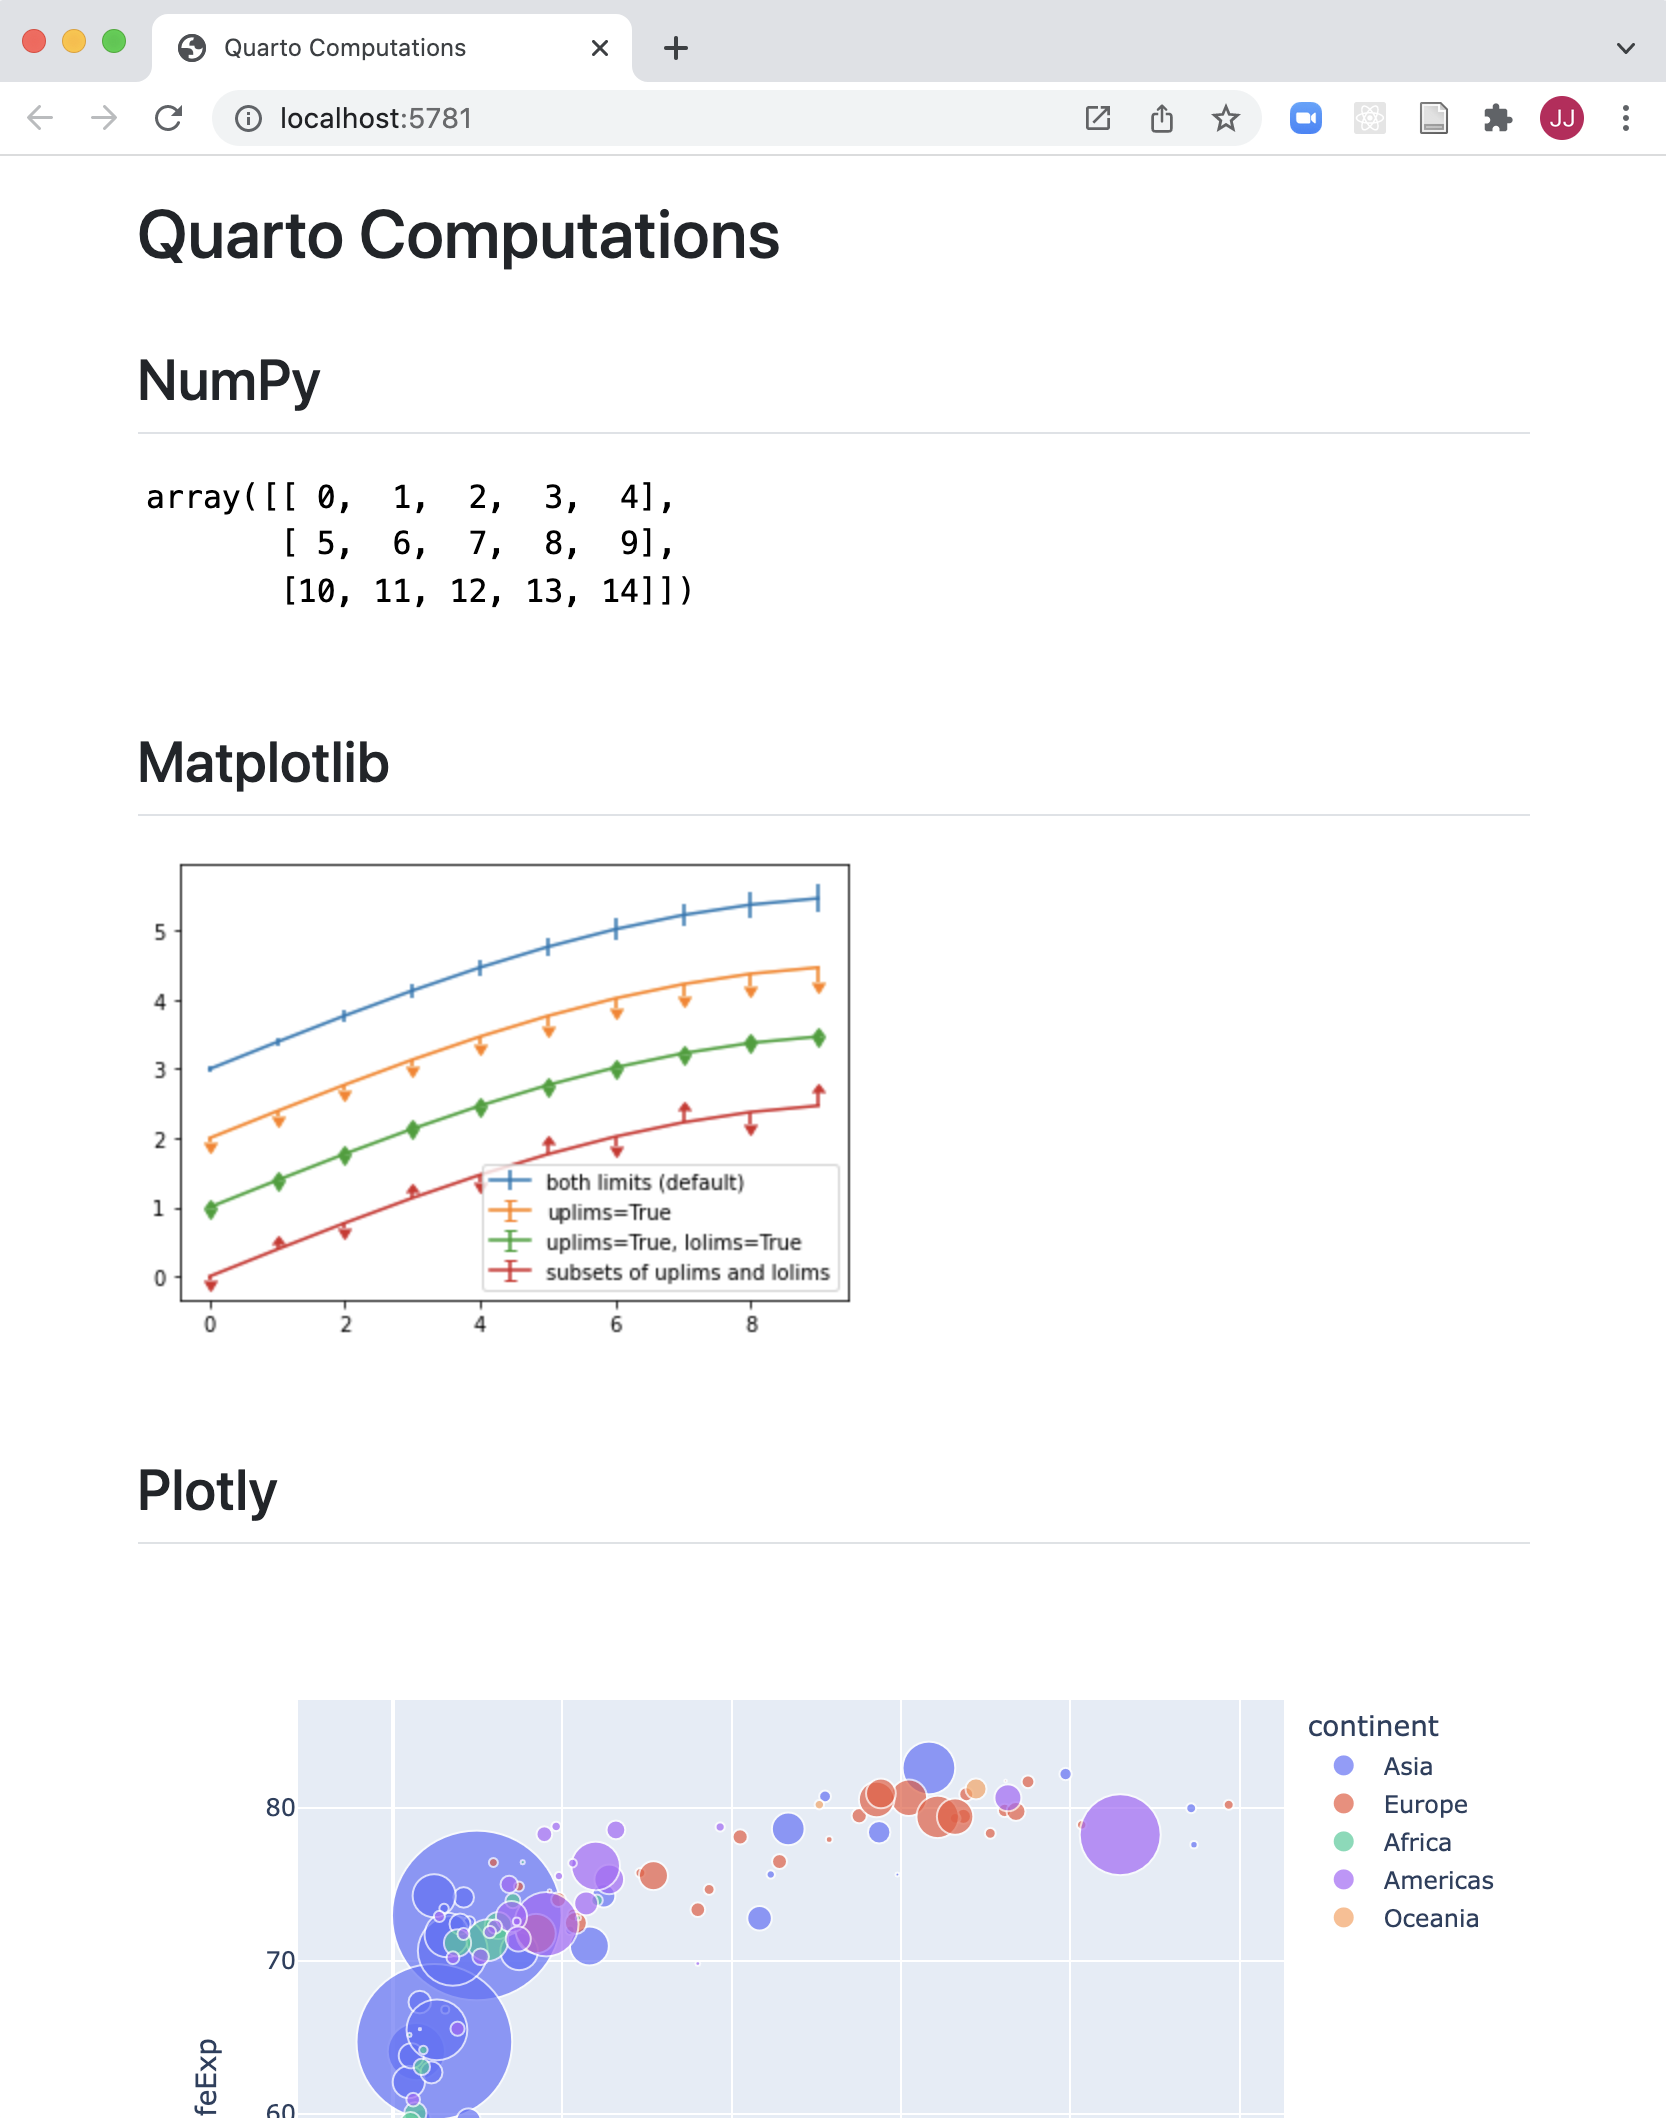 Output of notebook with echo: false set, shows resulting array in NumPy section, line chart in Numpy section, and interactive bubble chart in Plotly section.